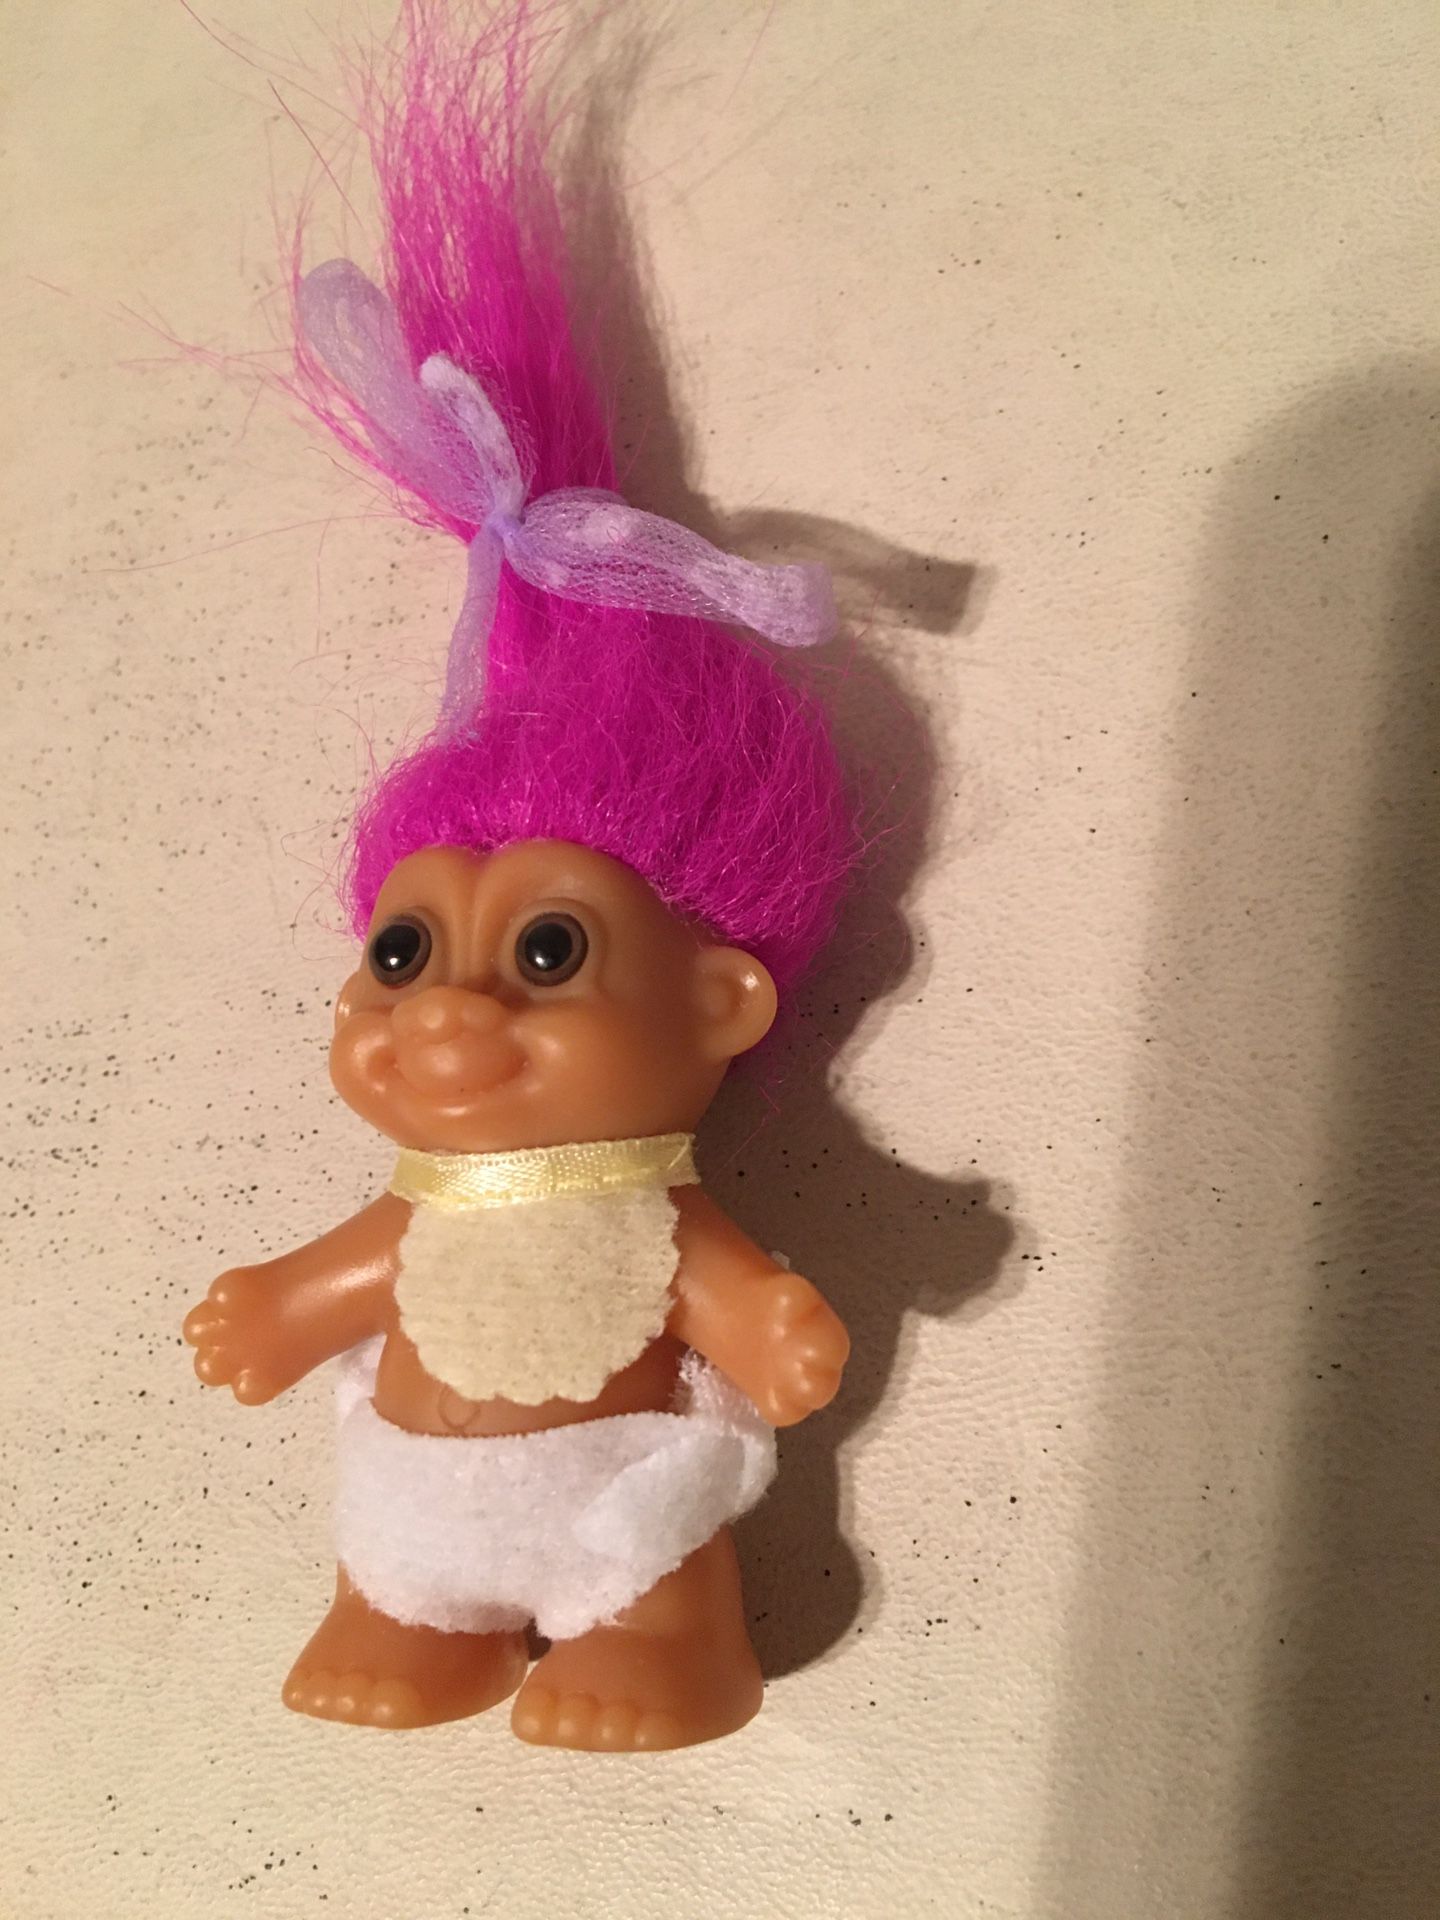 2 inch baby troll wearing bib and diaper, 5 inches including hair